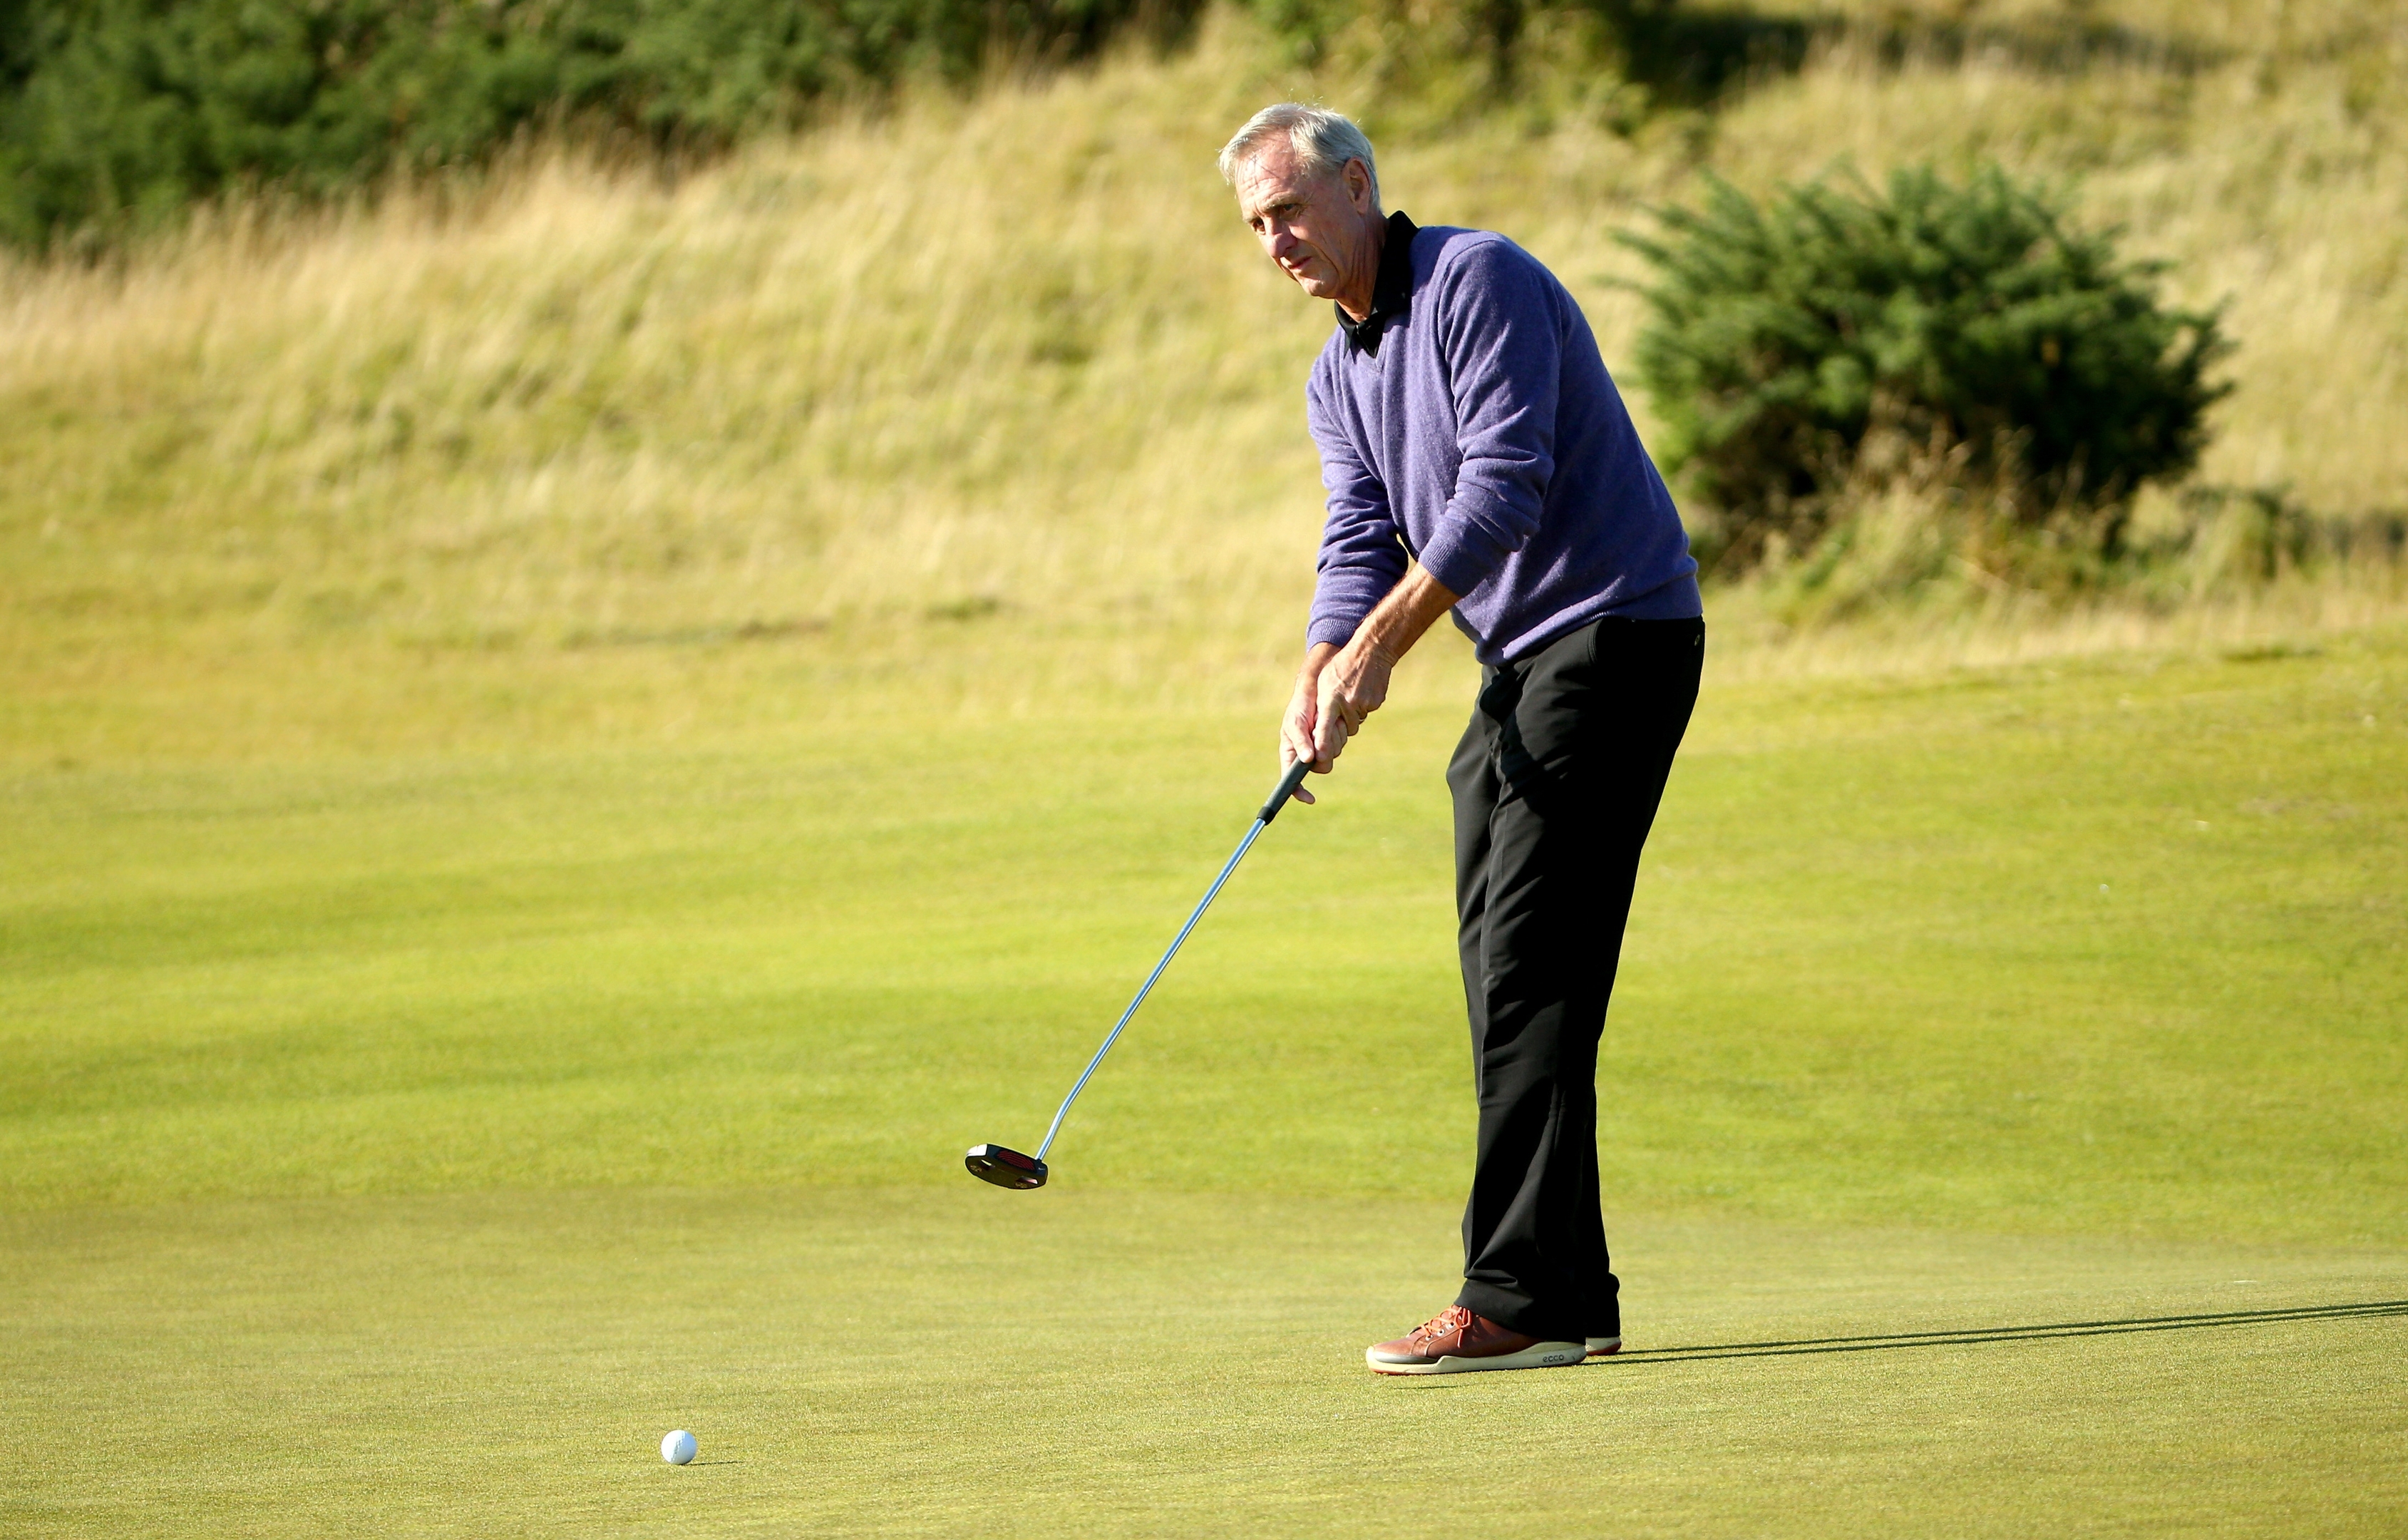 Dutch football legend Johan Cruyff during the first practice round of championship at the Kingsbarns Golf Links